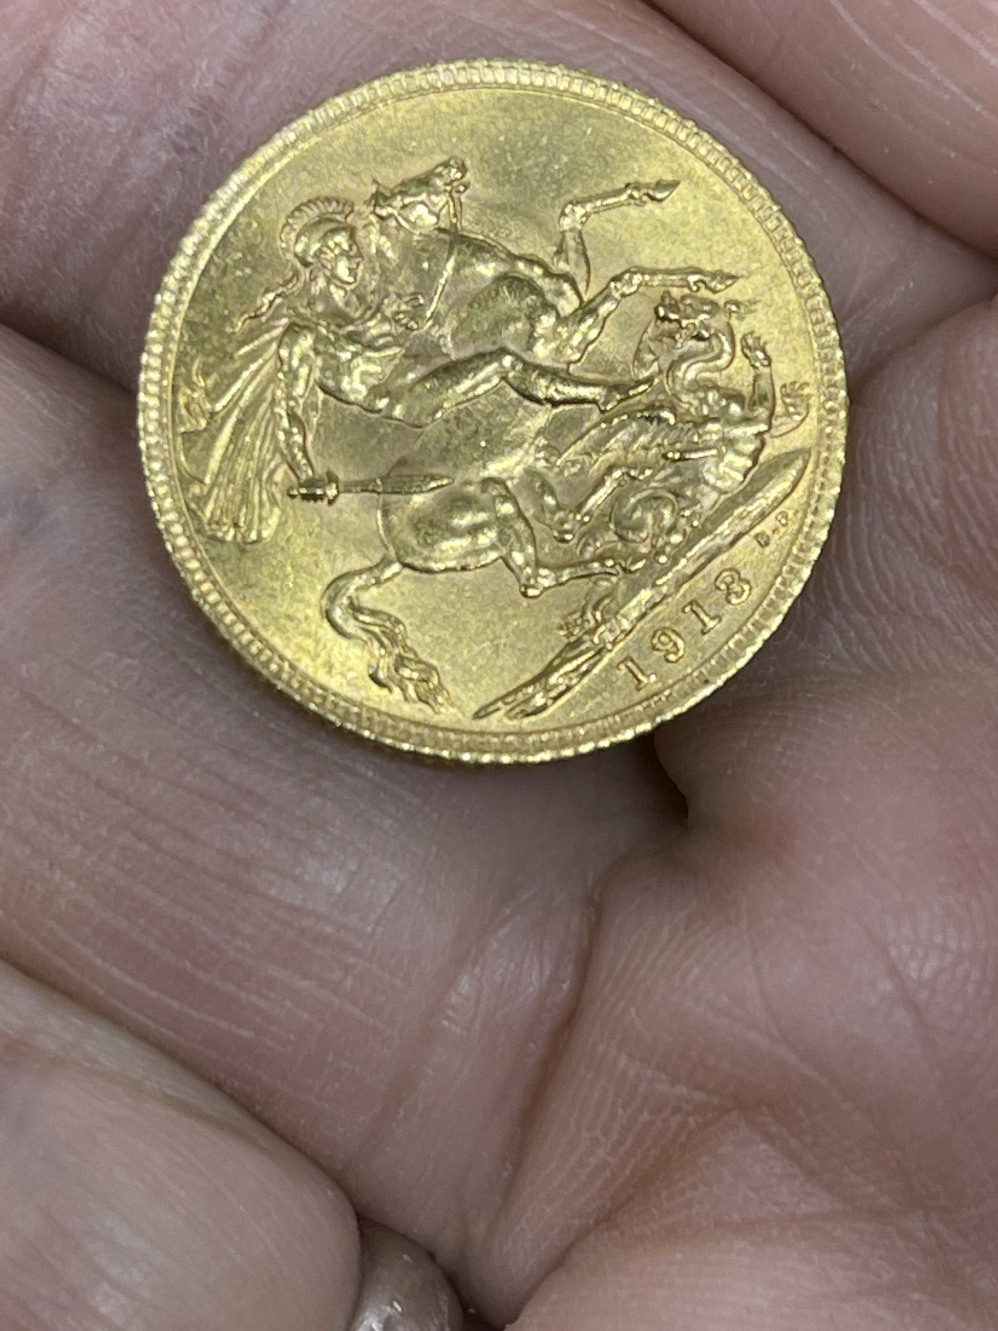 Coins: 1918 George V Sovereign. - Image 2 of 2